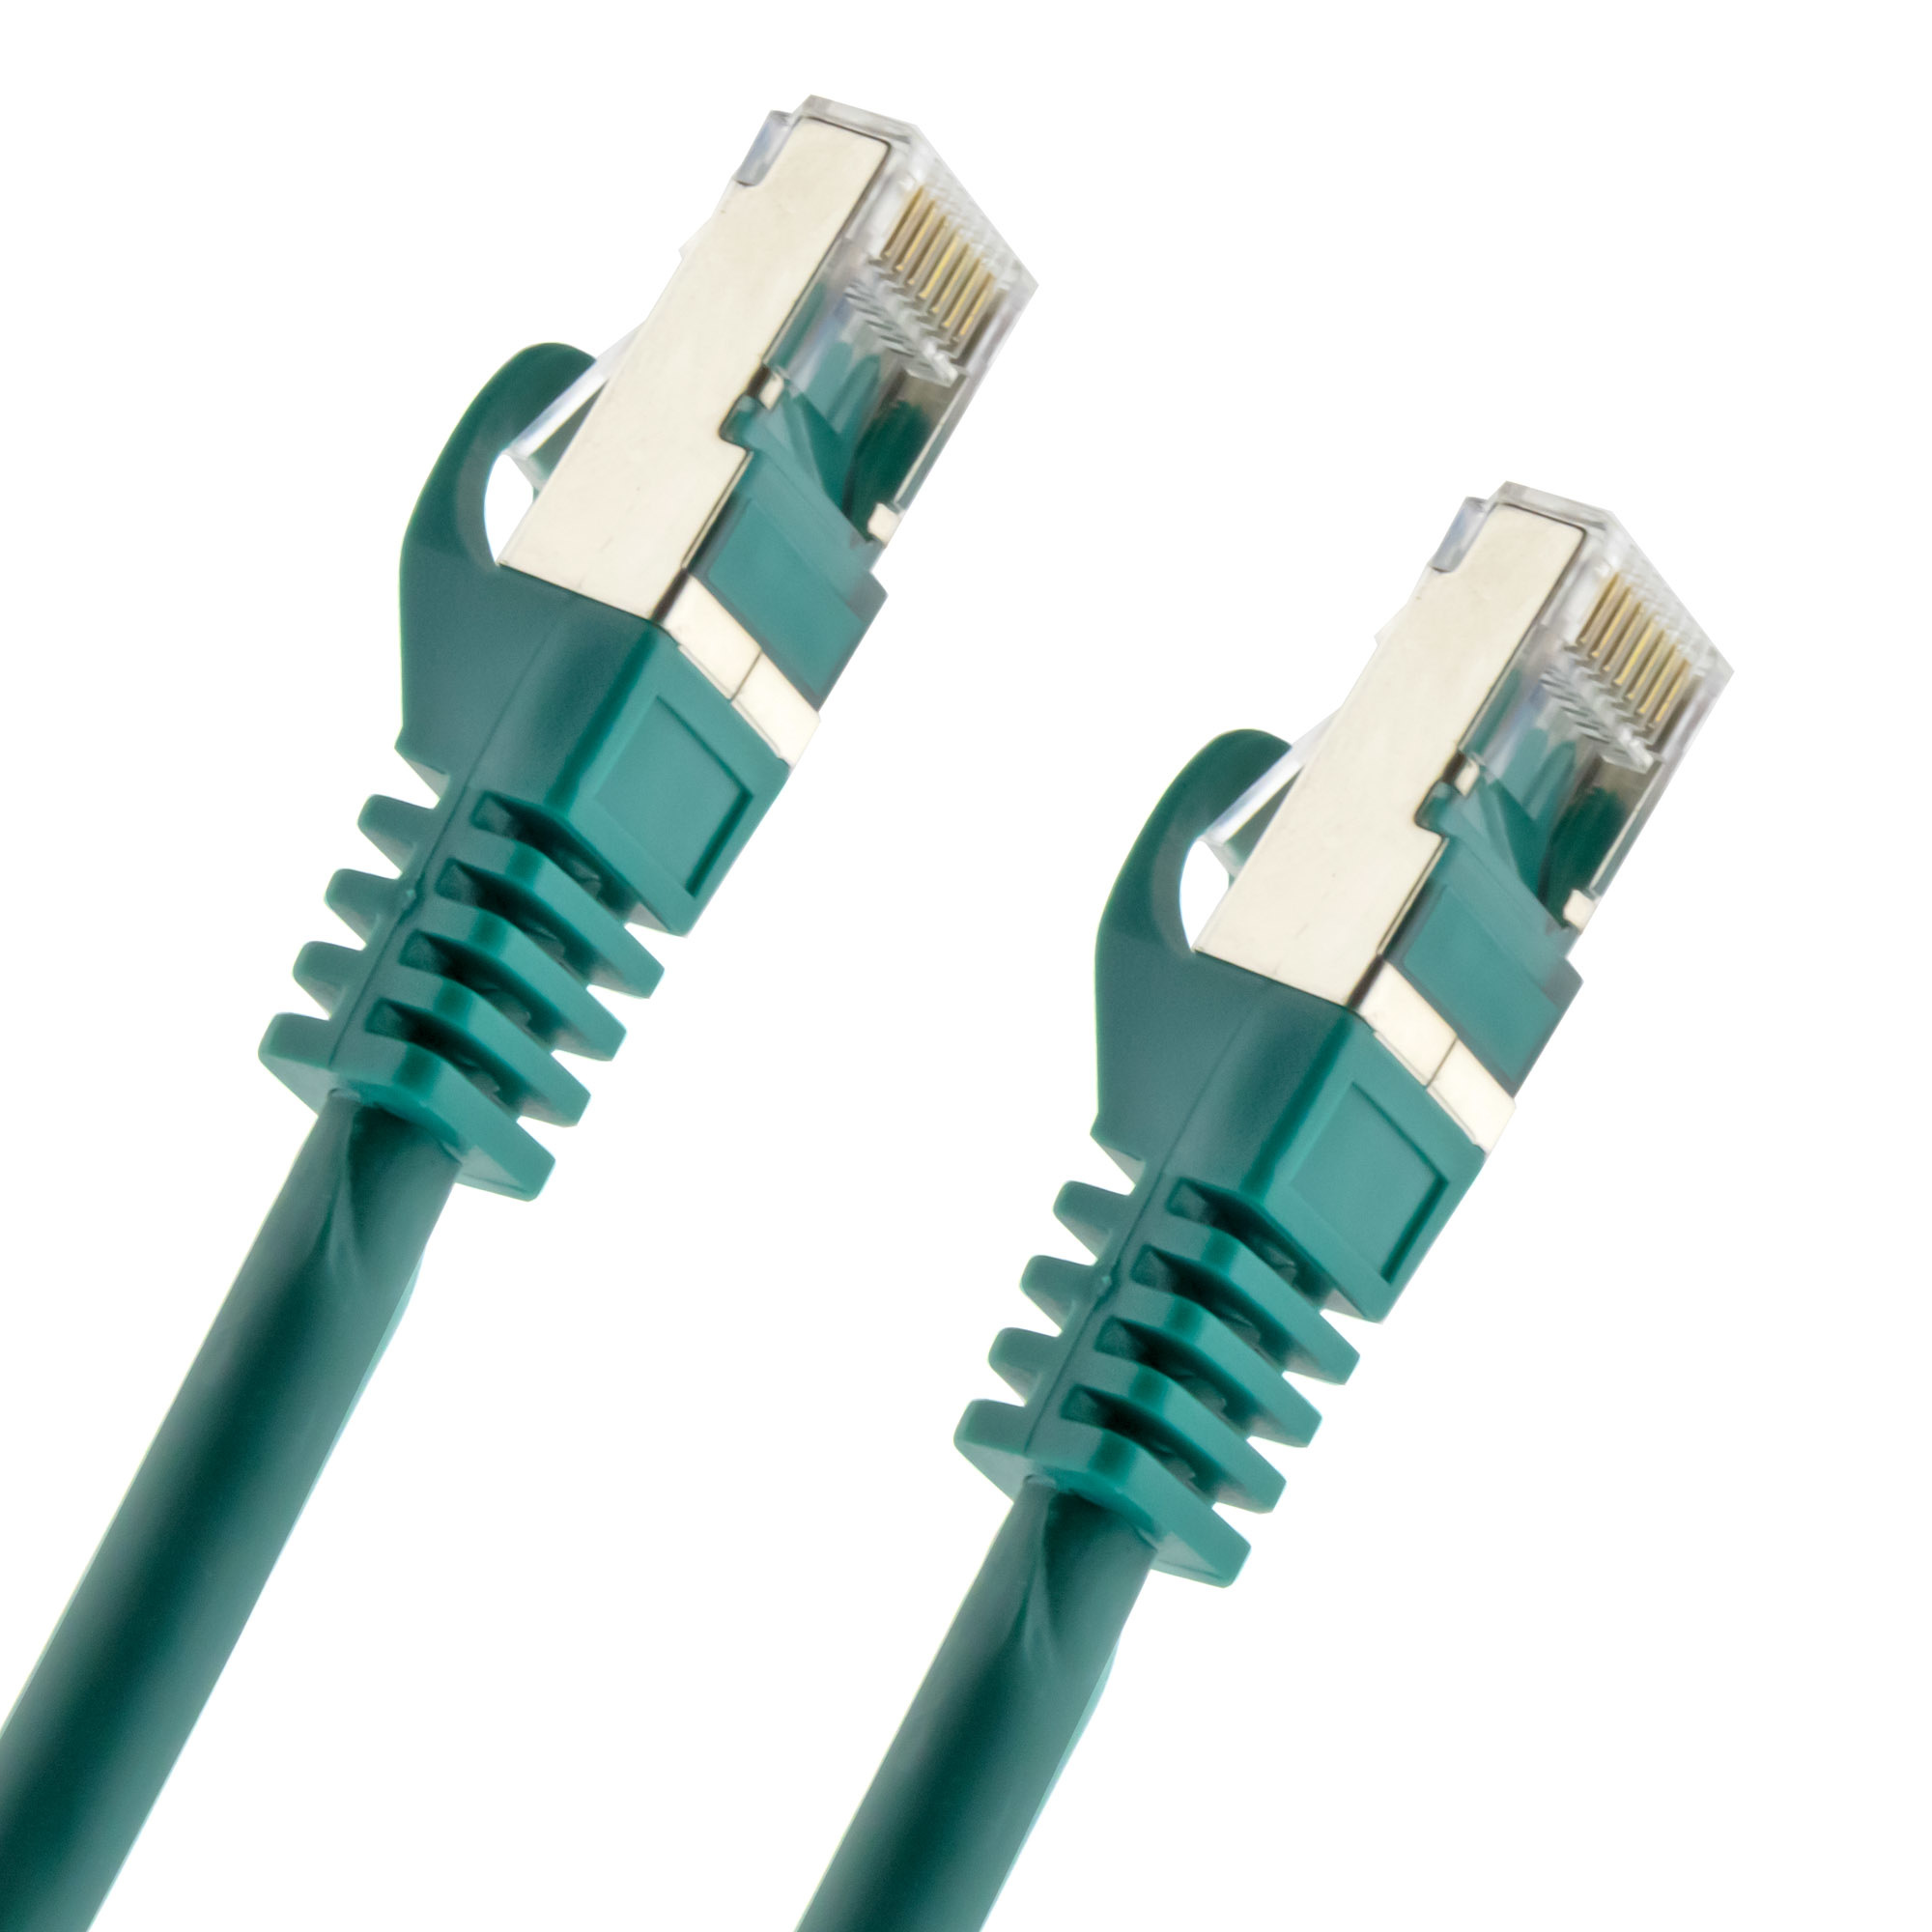 Network cable Cat. 7 S/FTP PIMF 0.50 meter green